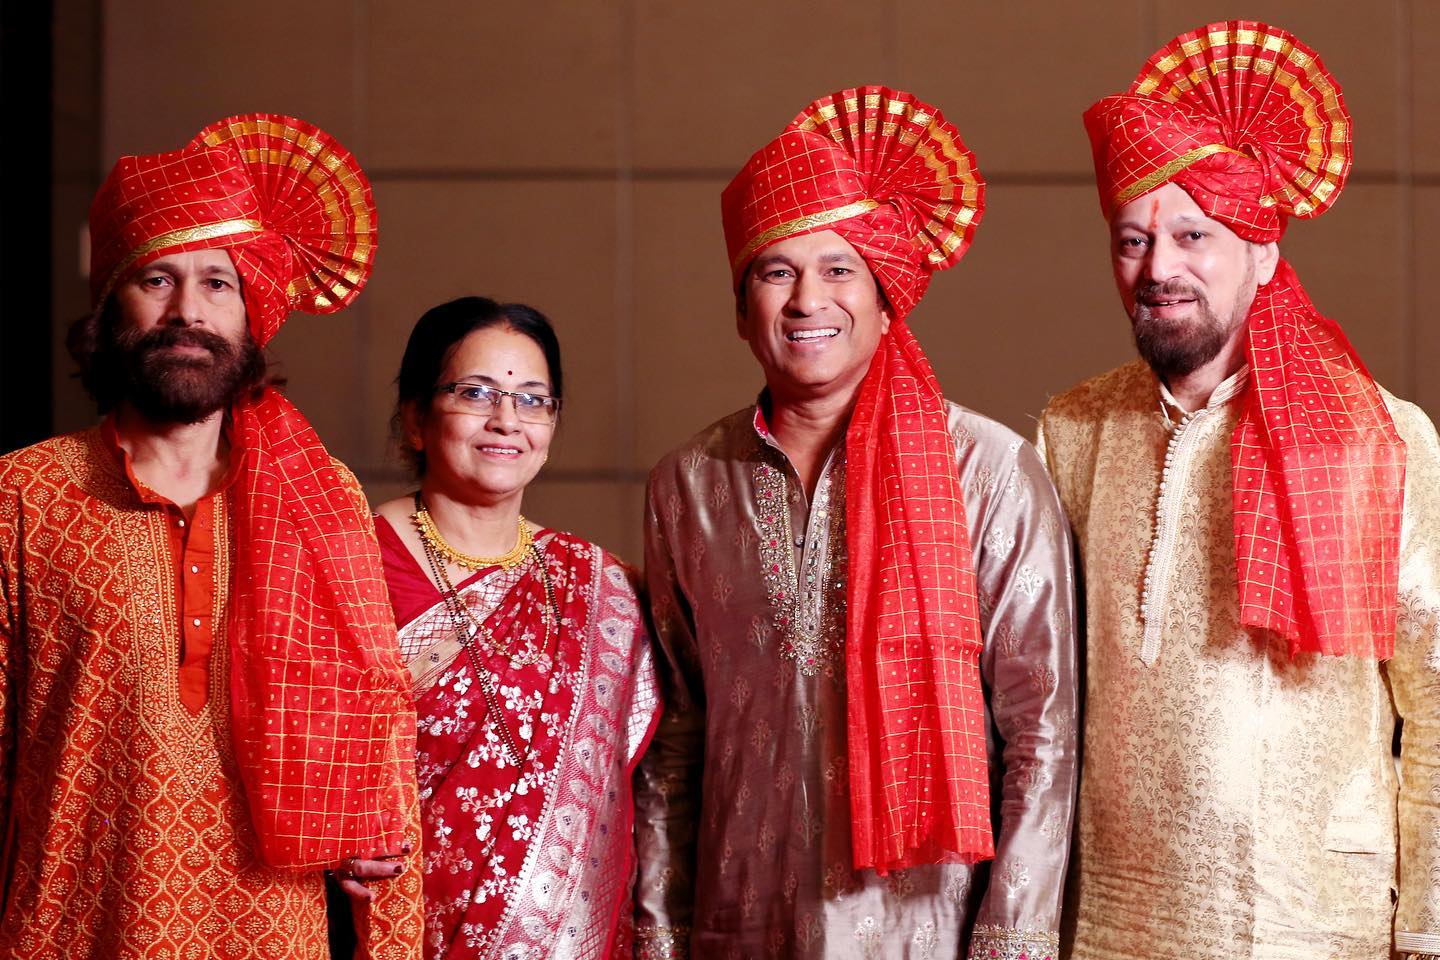  Sachin tied the knot at his niece's wedding